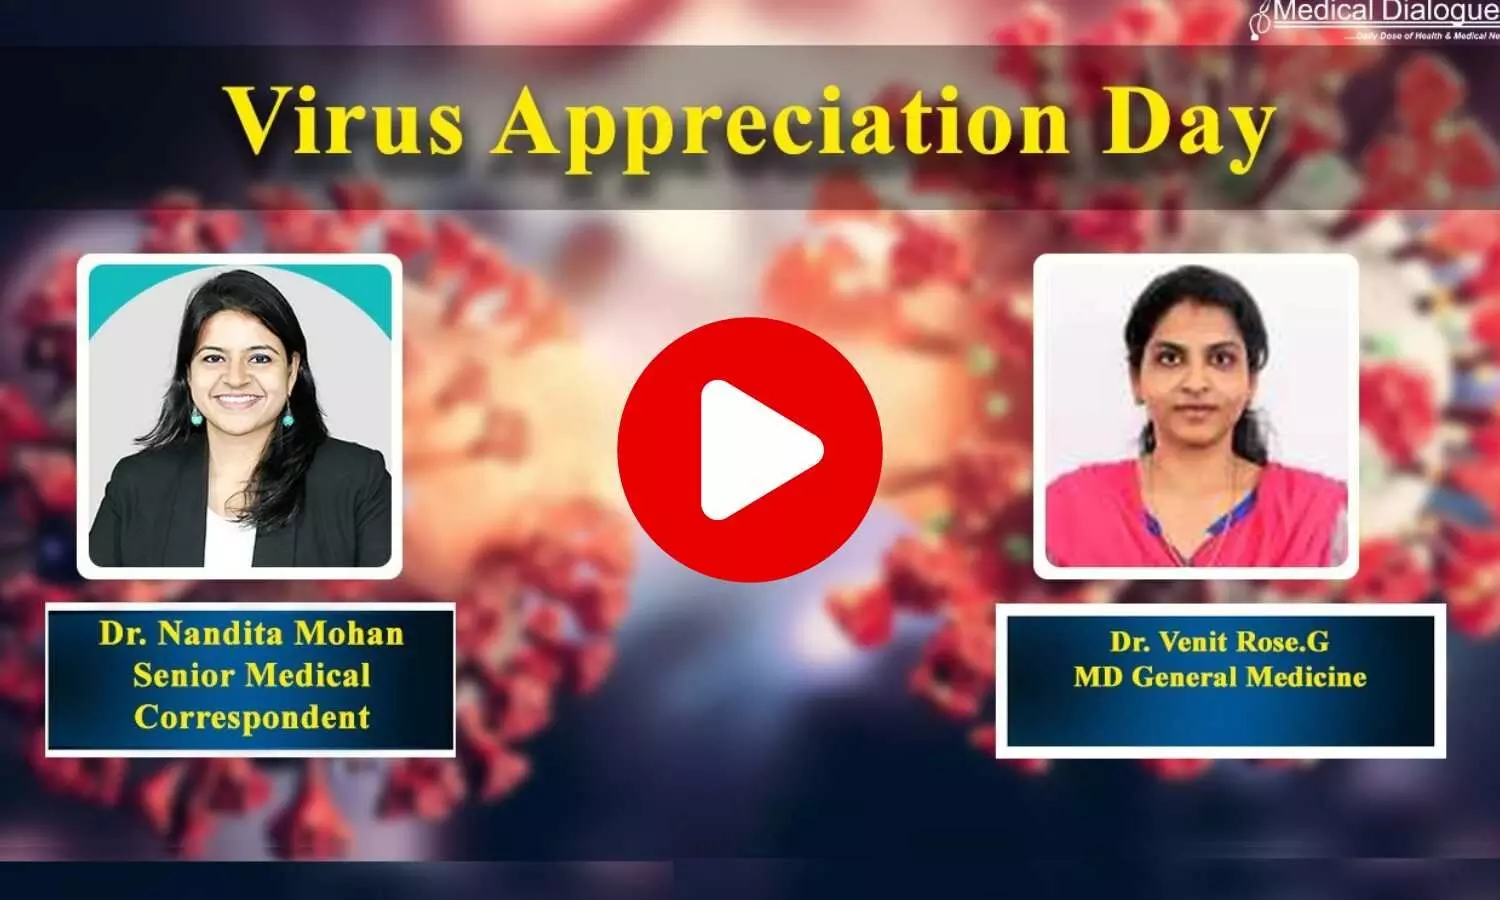 Understand the impact virii have in our lives on Virus Appreciation Day- Ft. Dr. Venit Rose G